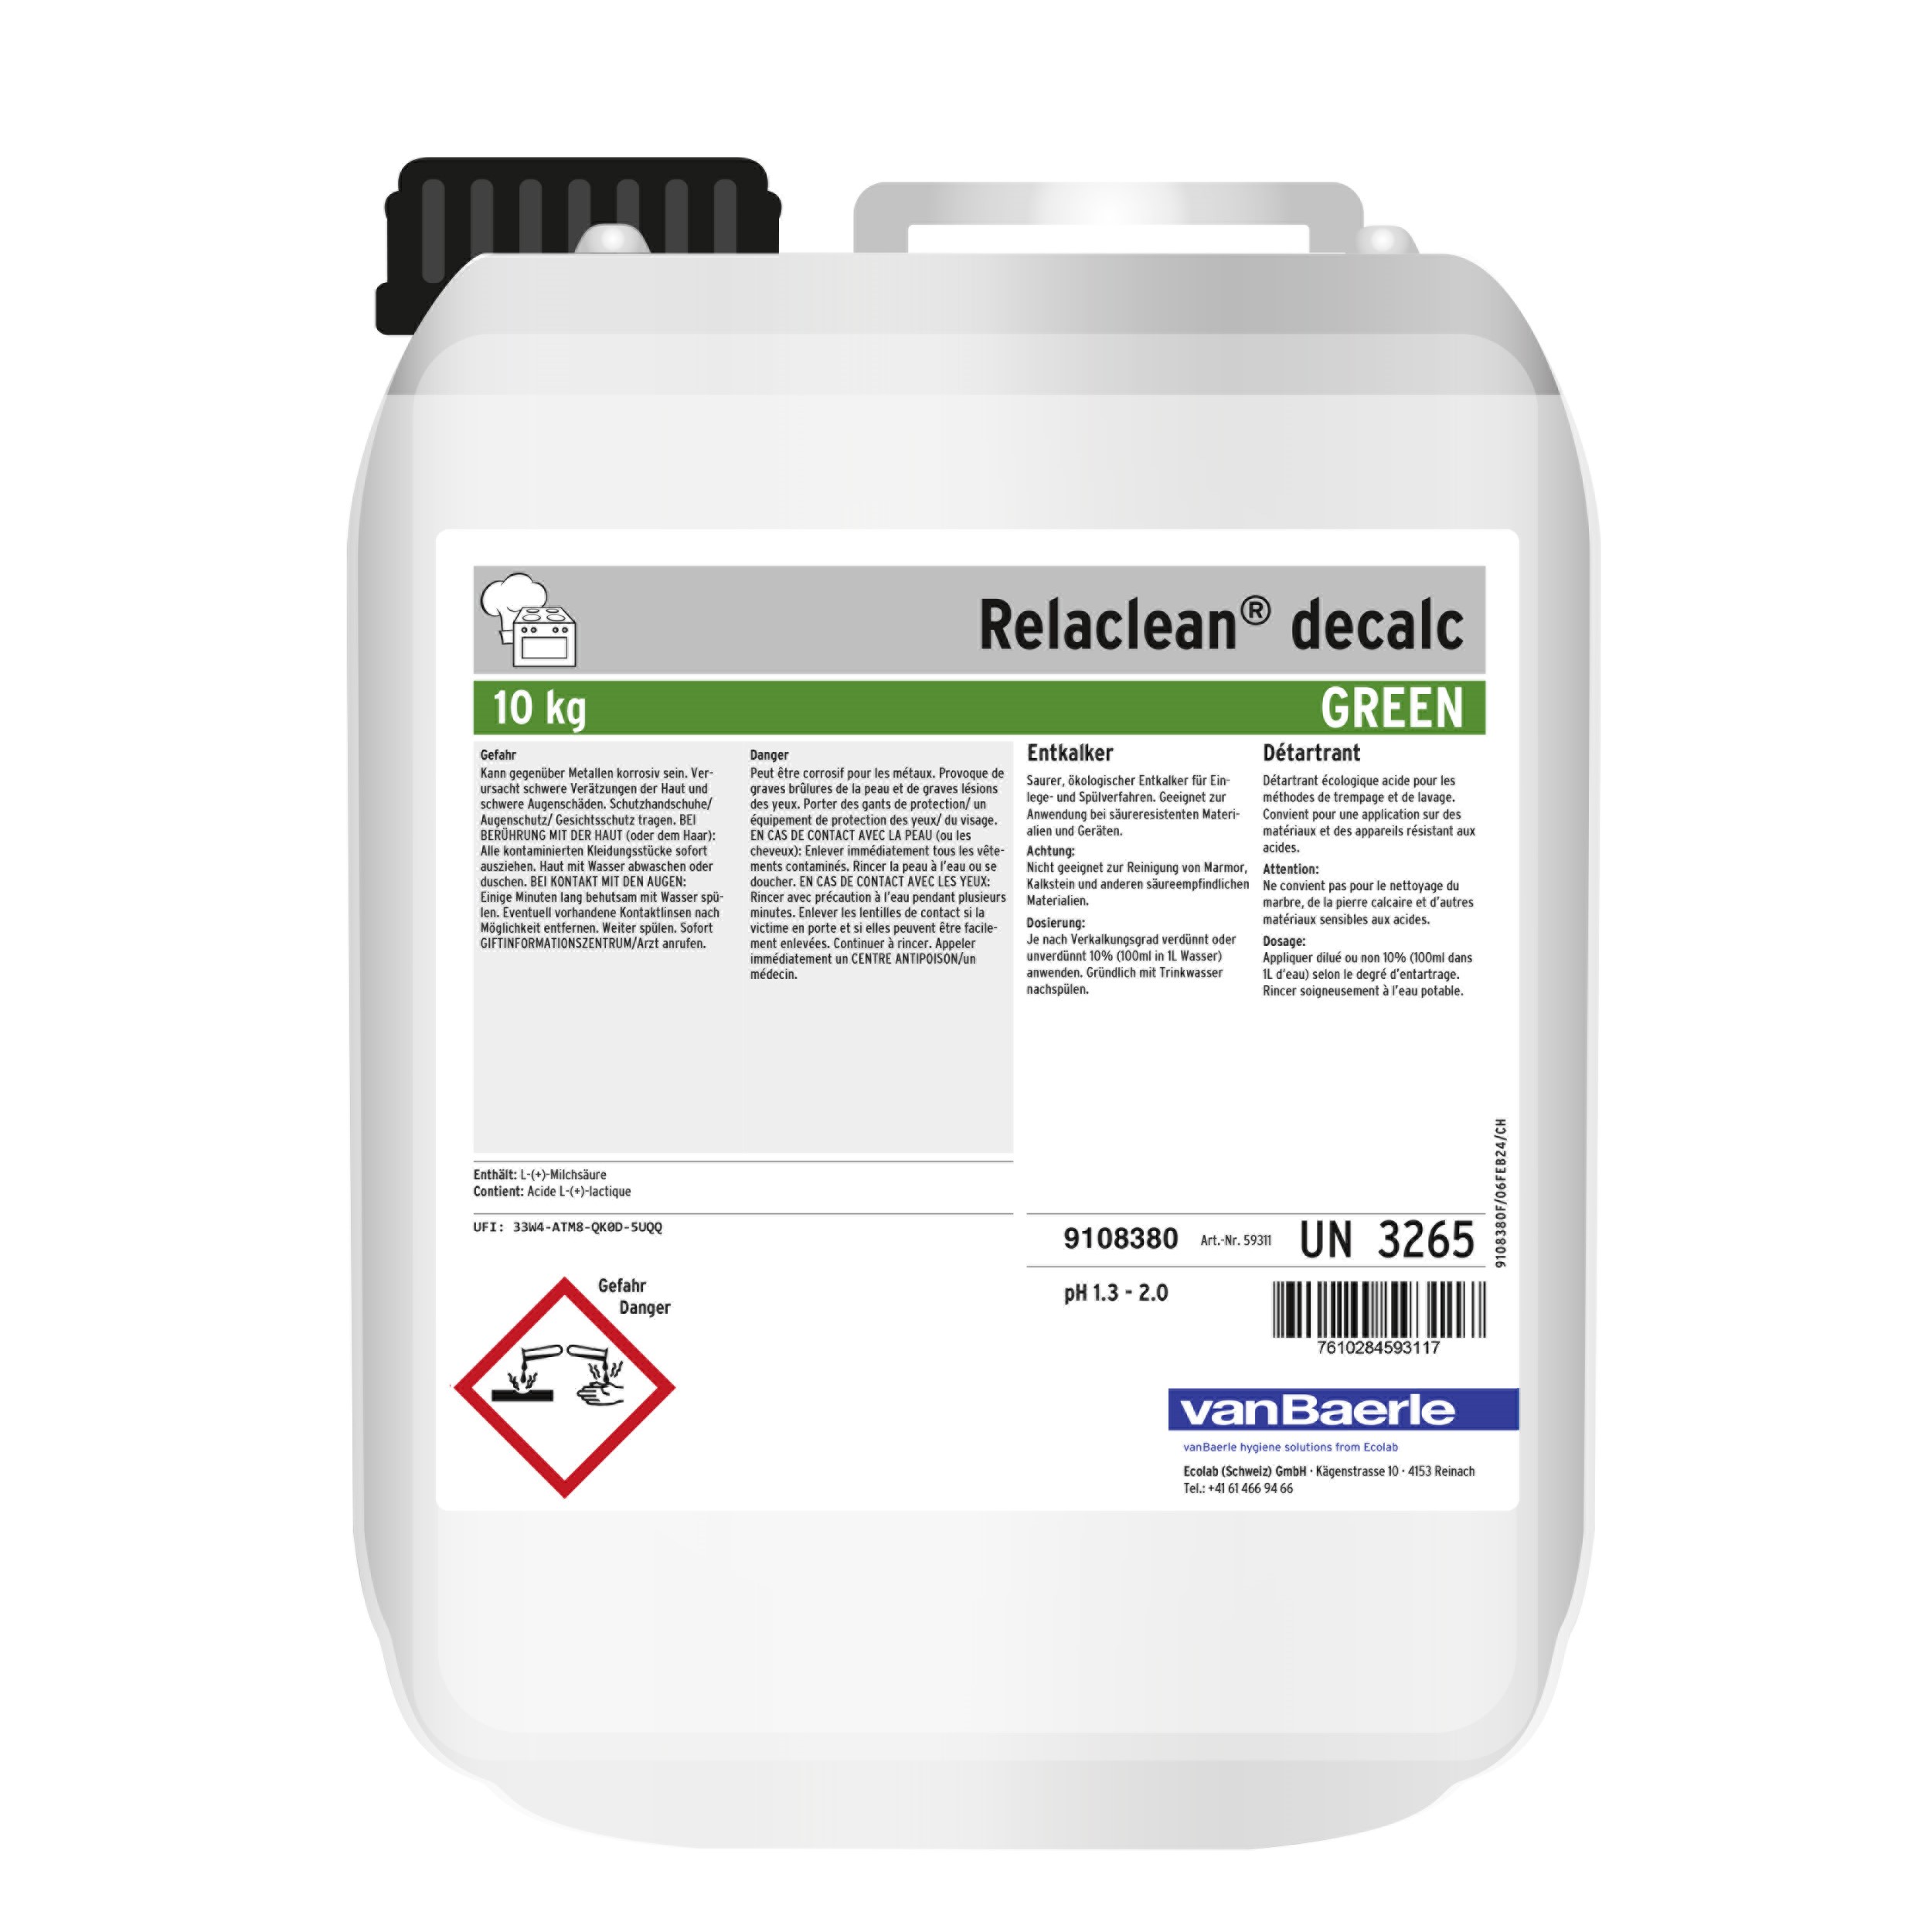 Relaclean decalc 10 kg